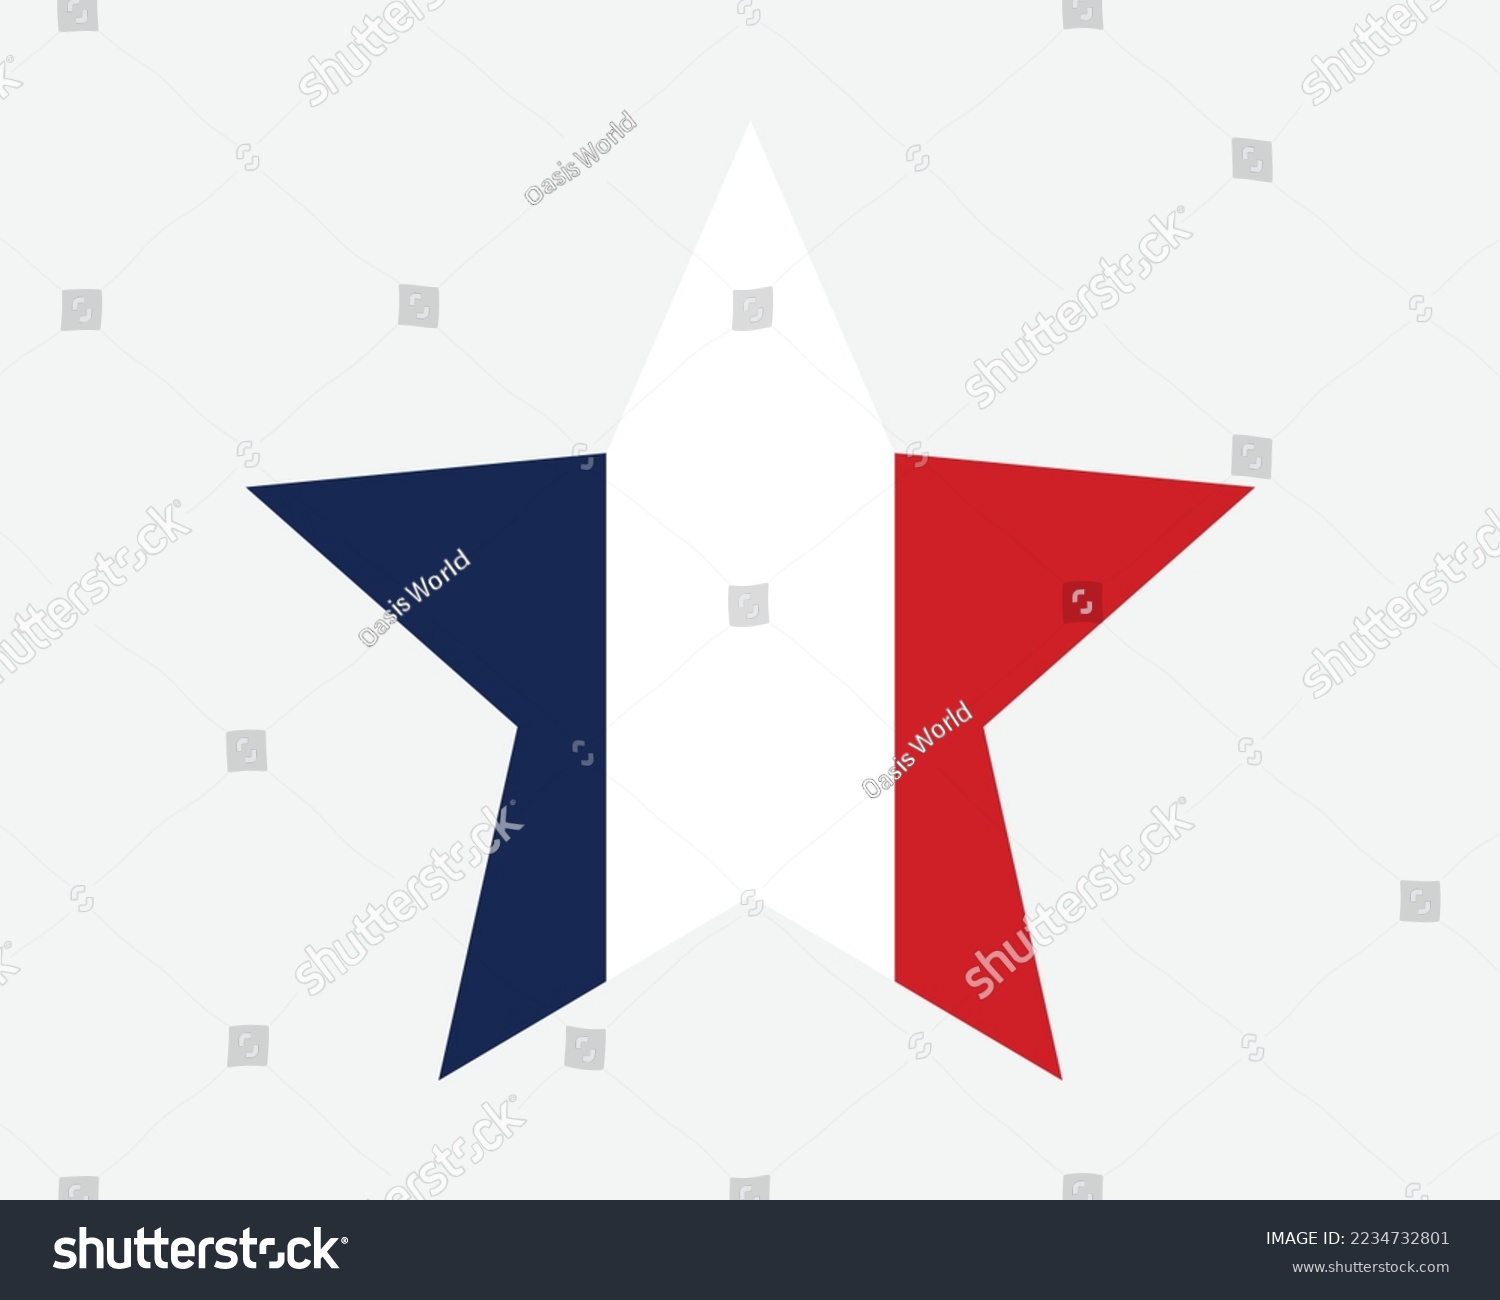 SVG of France Star Flag. French Star Shape Flag. French Republic Country National Banner Icon Symbol Vector Flat Artwork Graphic Illustration svg